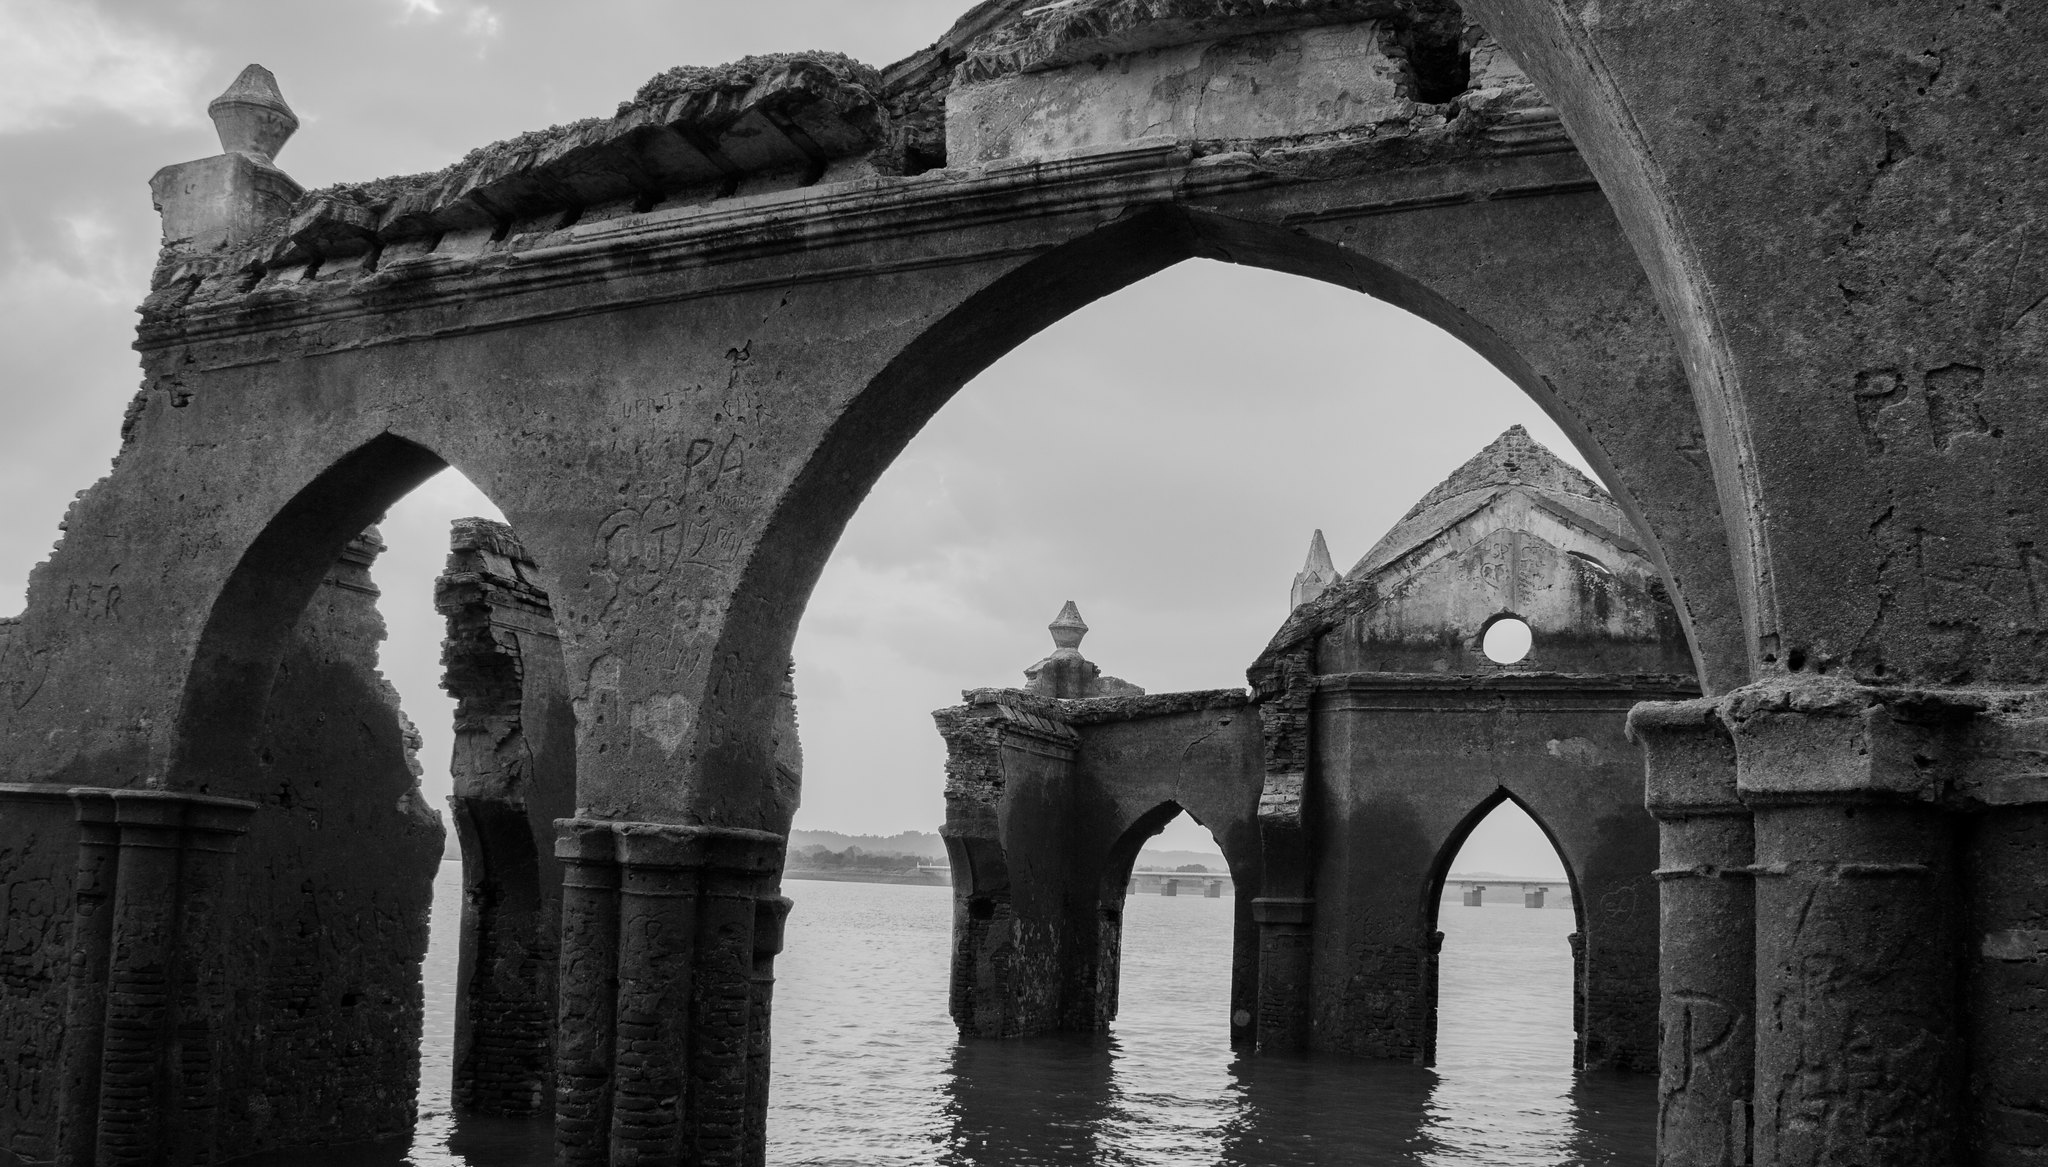 Visit this mysterious, floating church near Bangalore this weekend